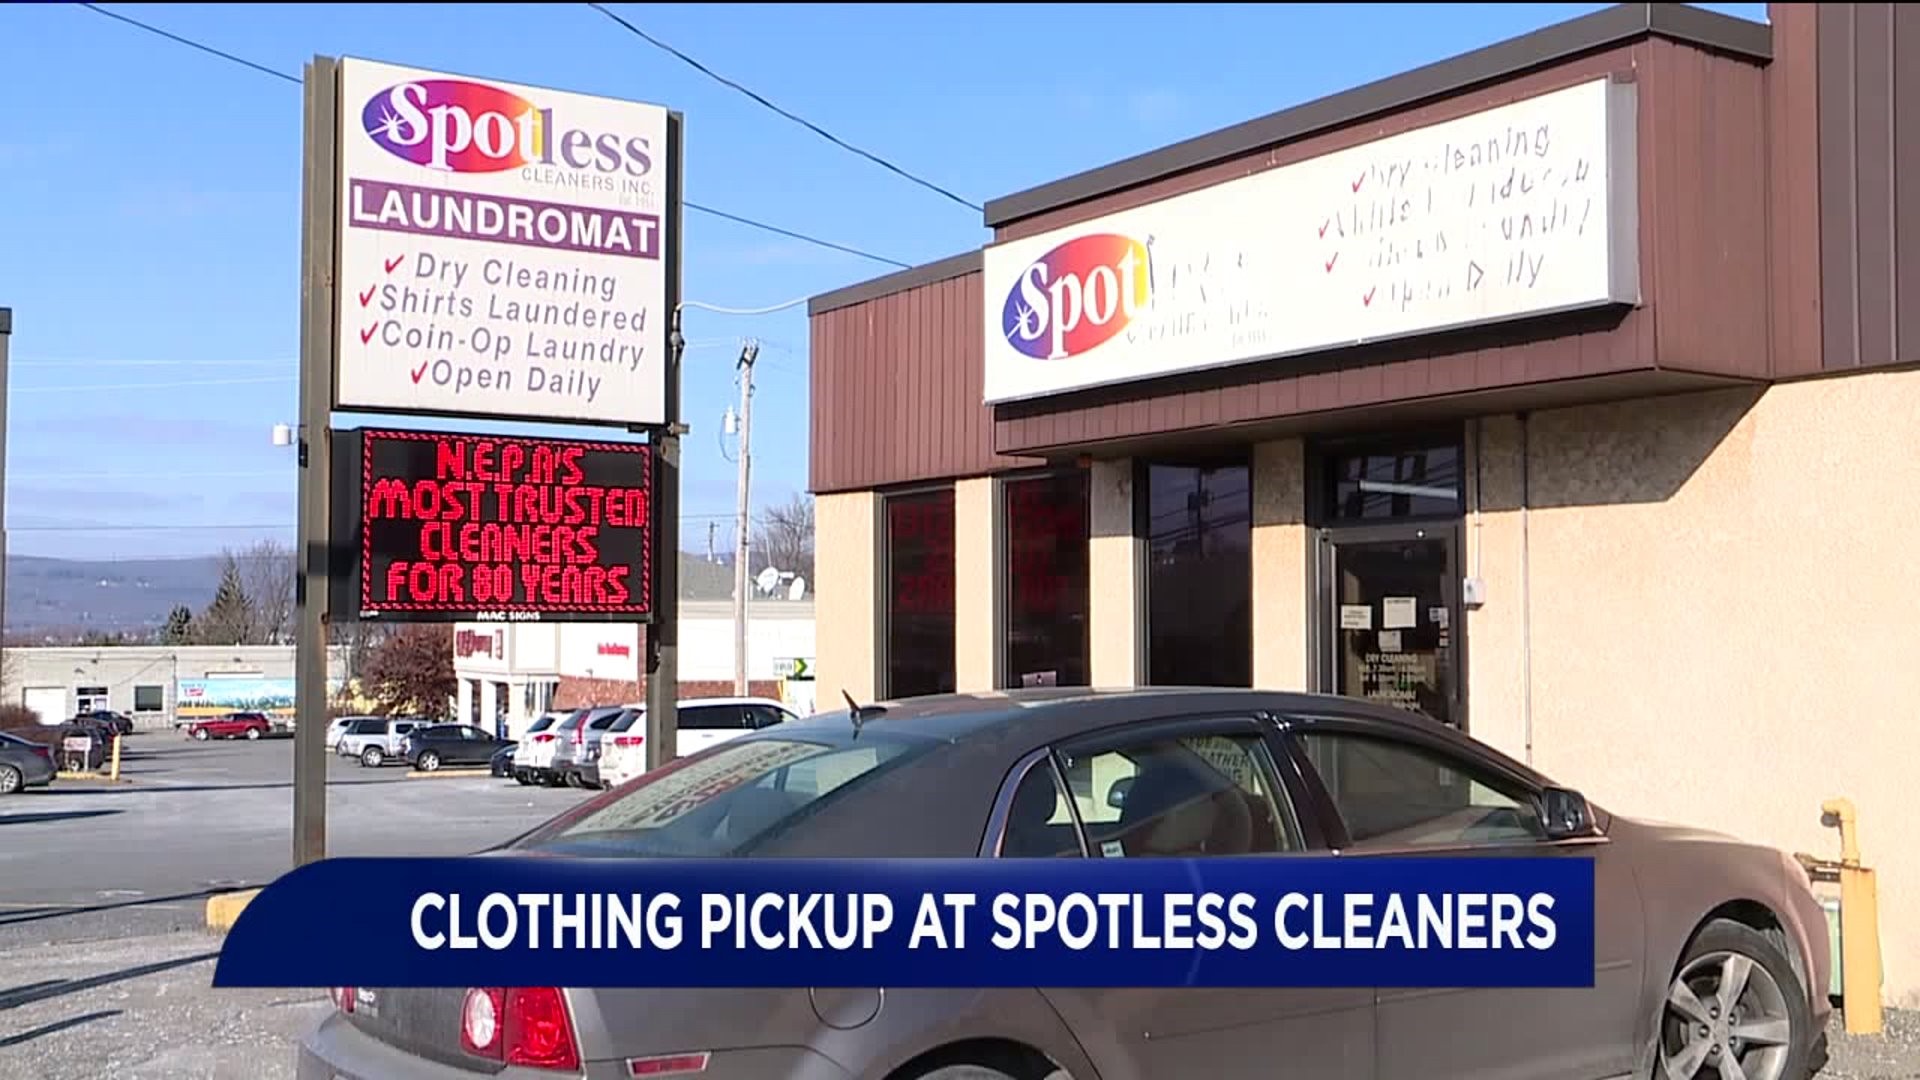 District Attorney: Claim Your Clothing at Spotless Cleaners